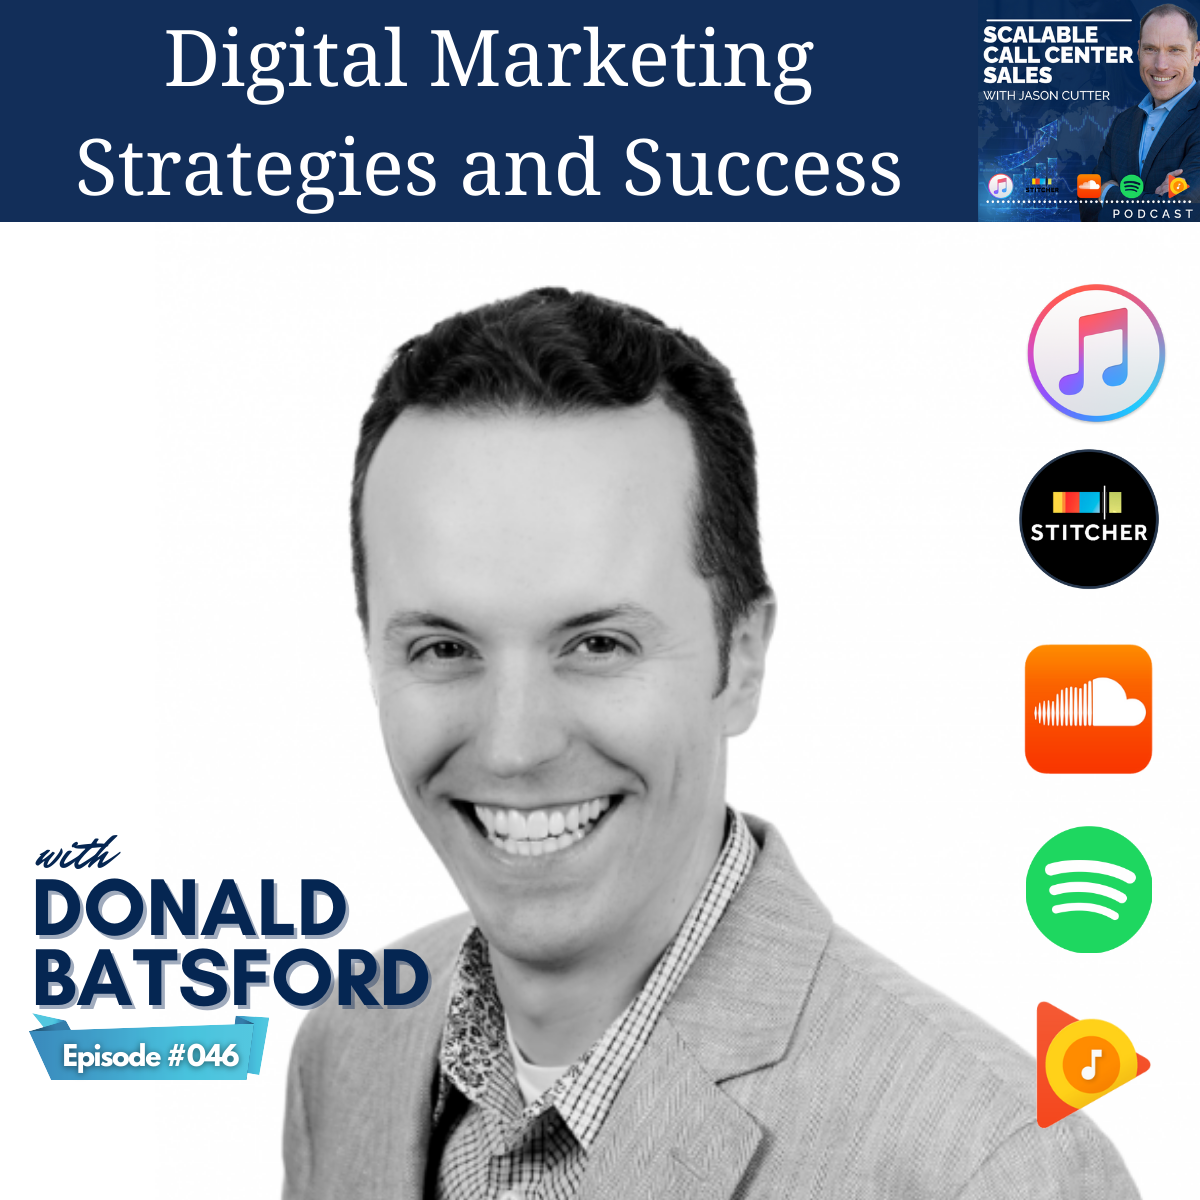 [046] Digital Marketing Strategies and Success, with Donald Batsford from Google